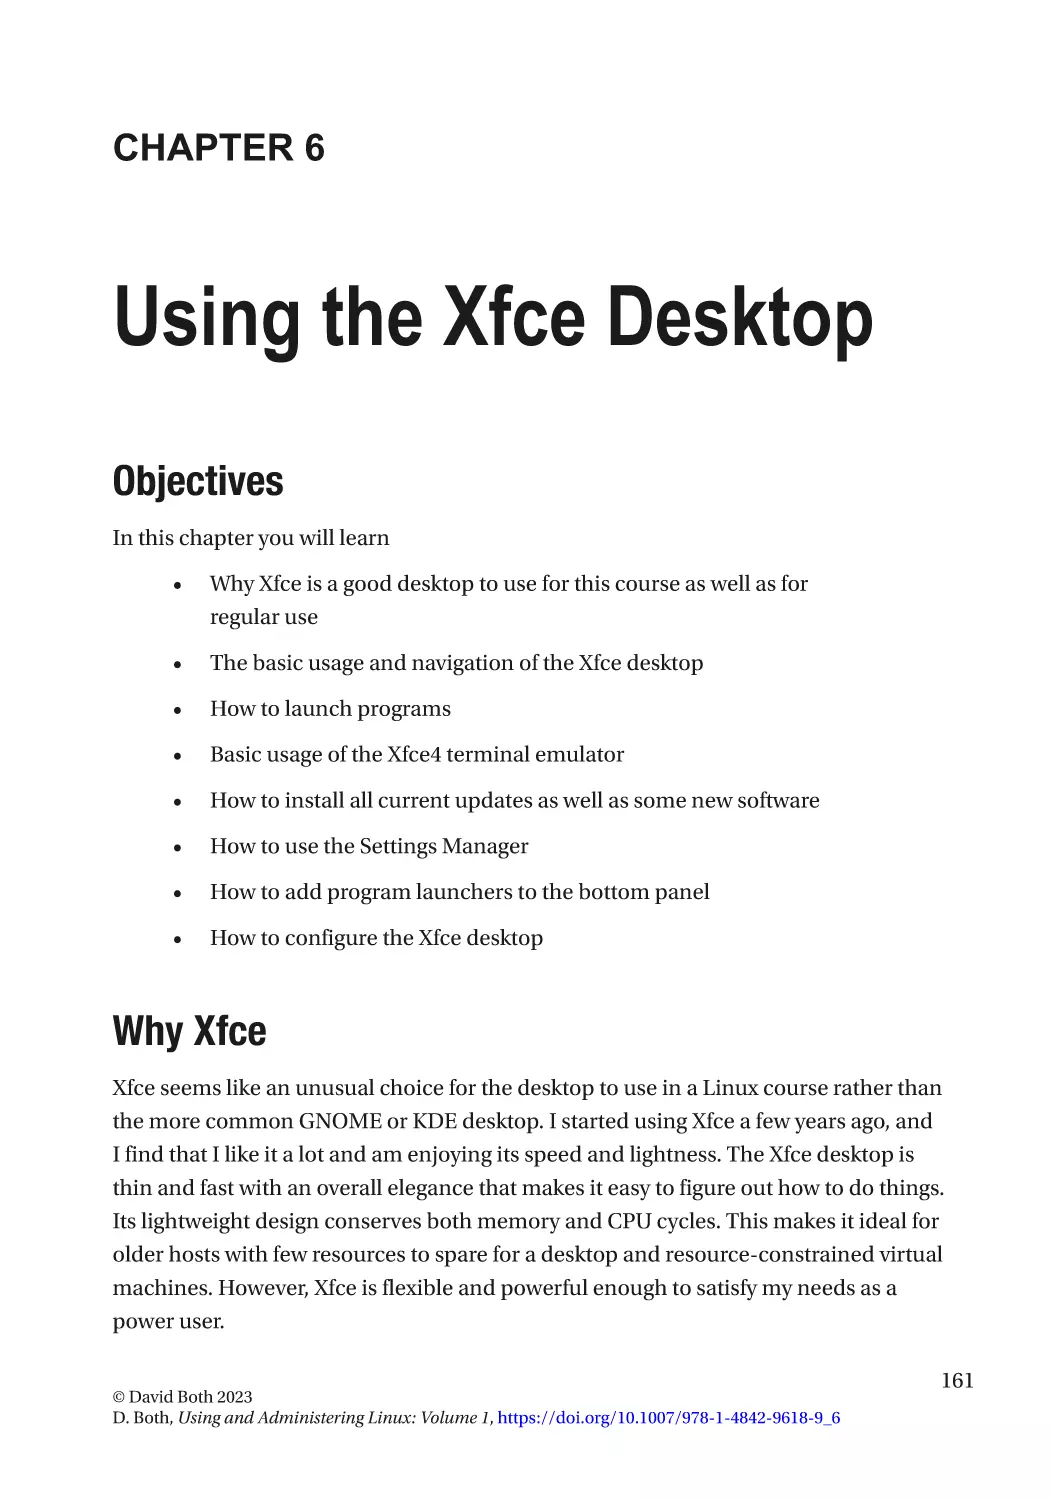 Chapter 6
Objectives
Why Xfce